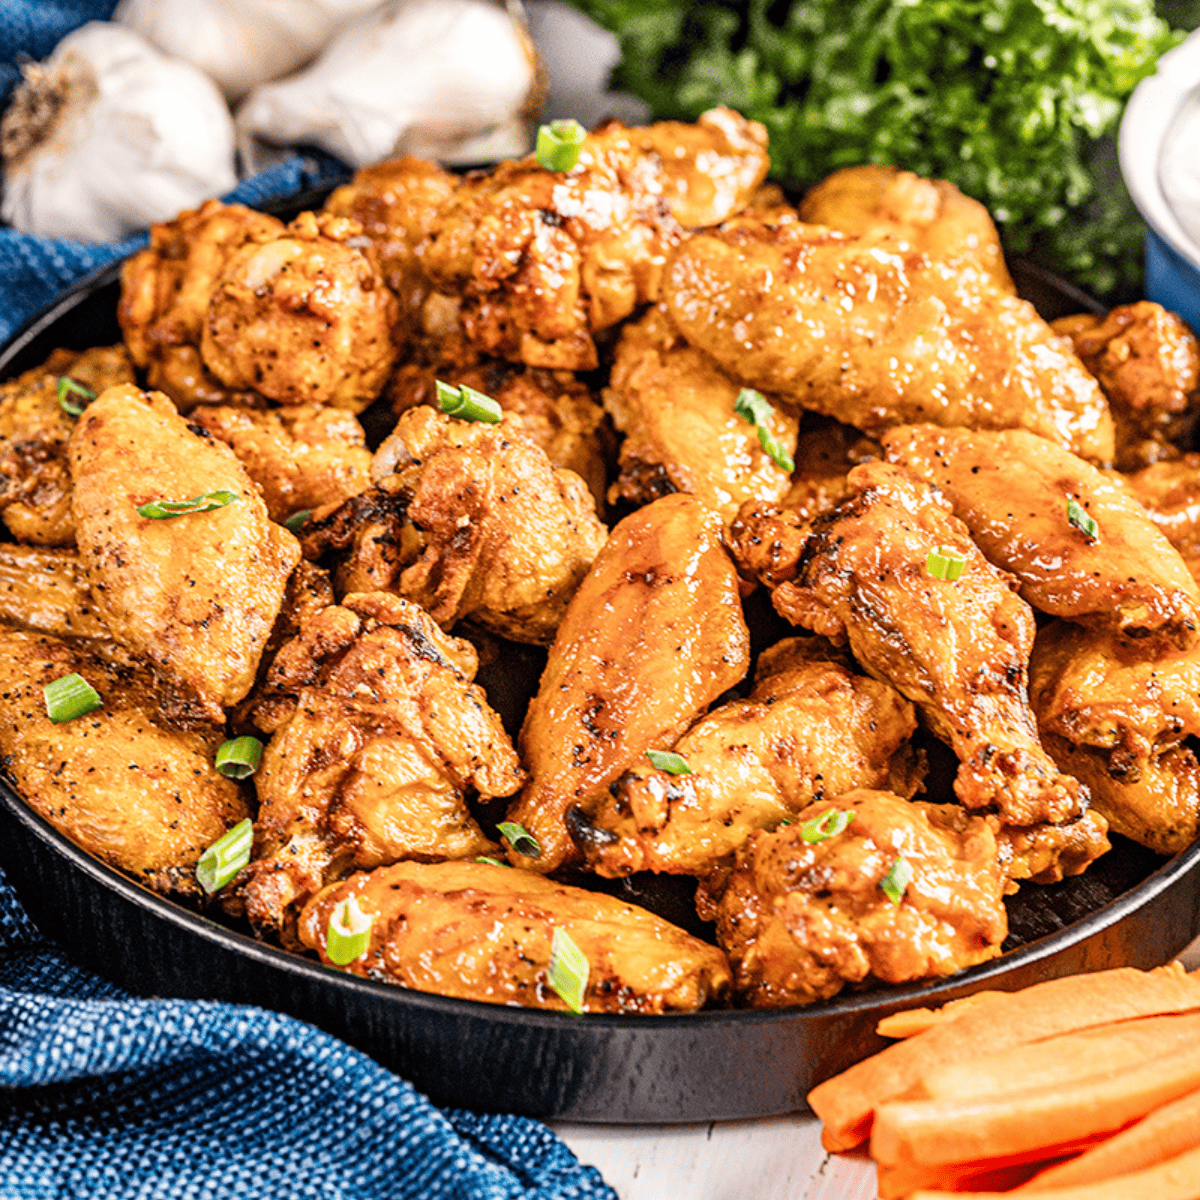 Decorative thumbnail preview image of Air Fryer Chicken Wings.